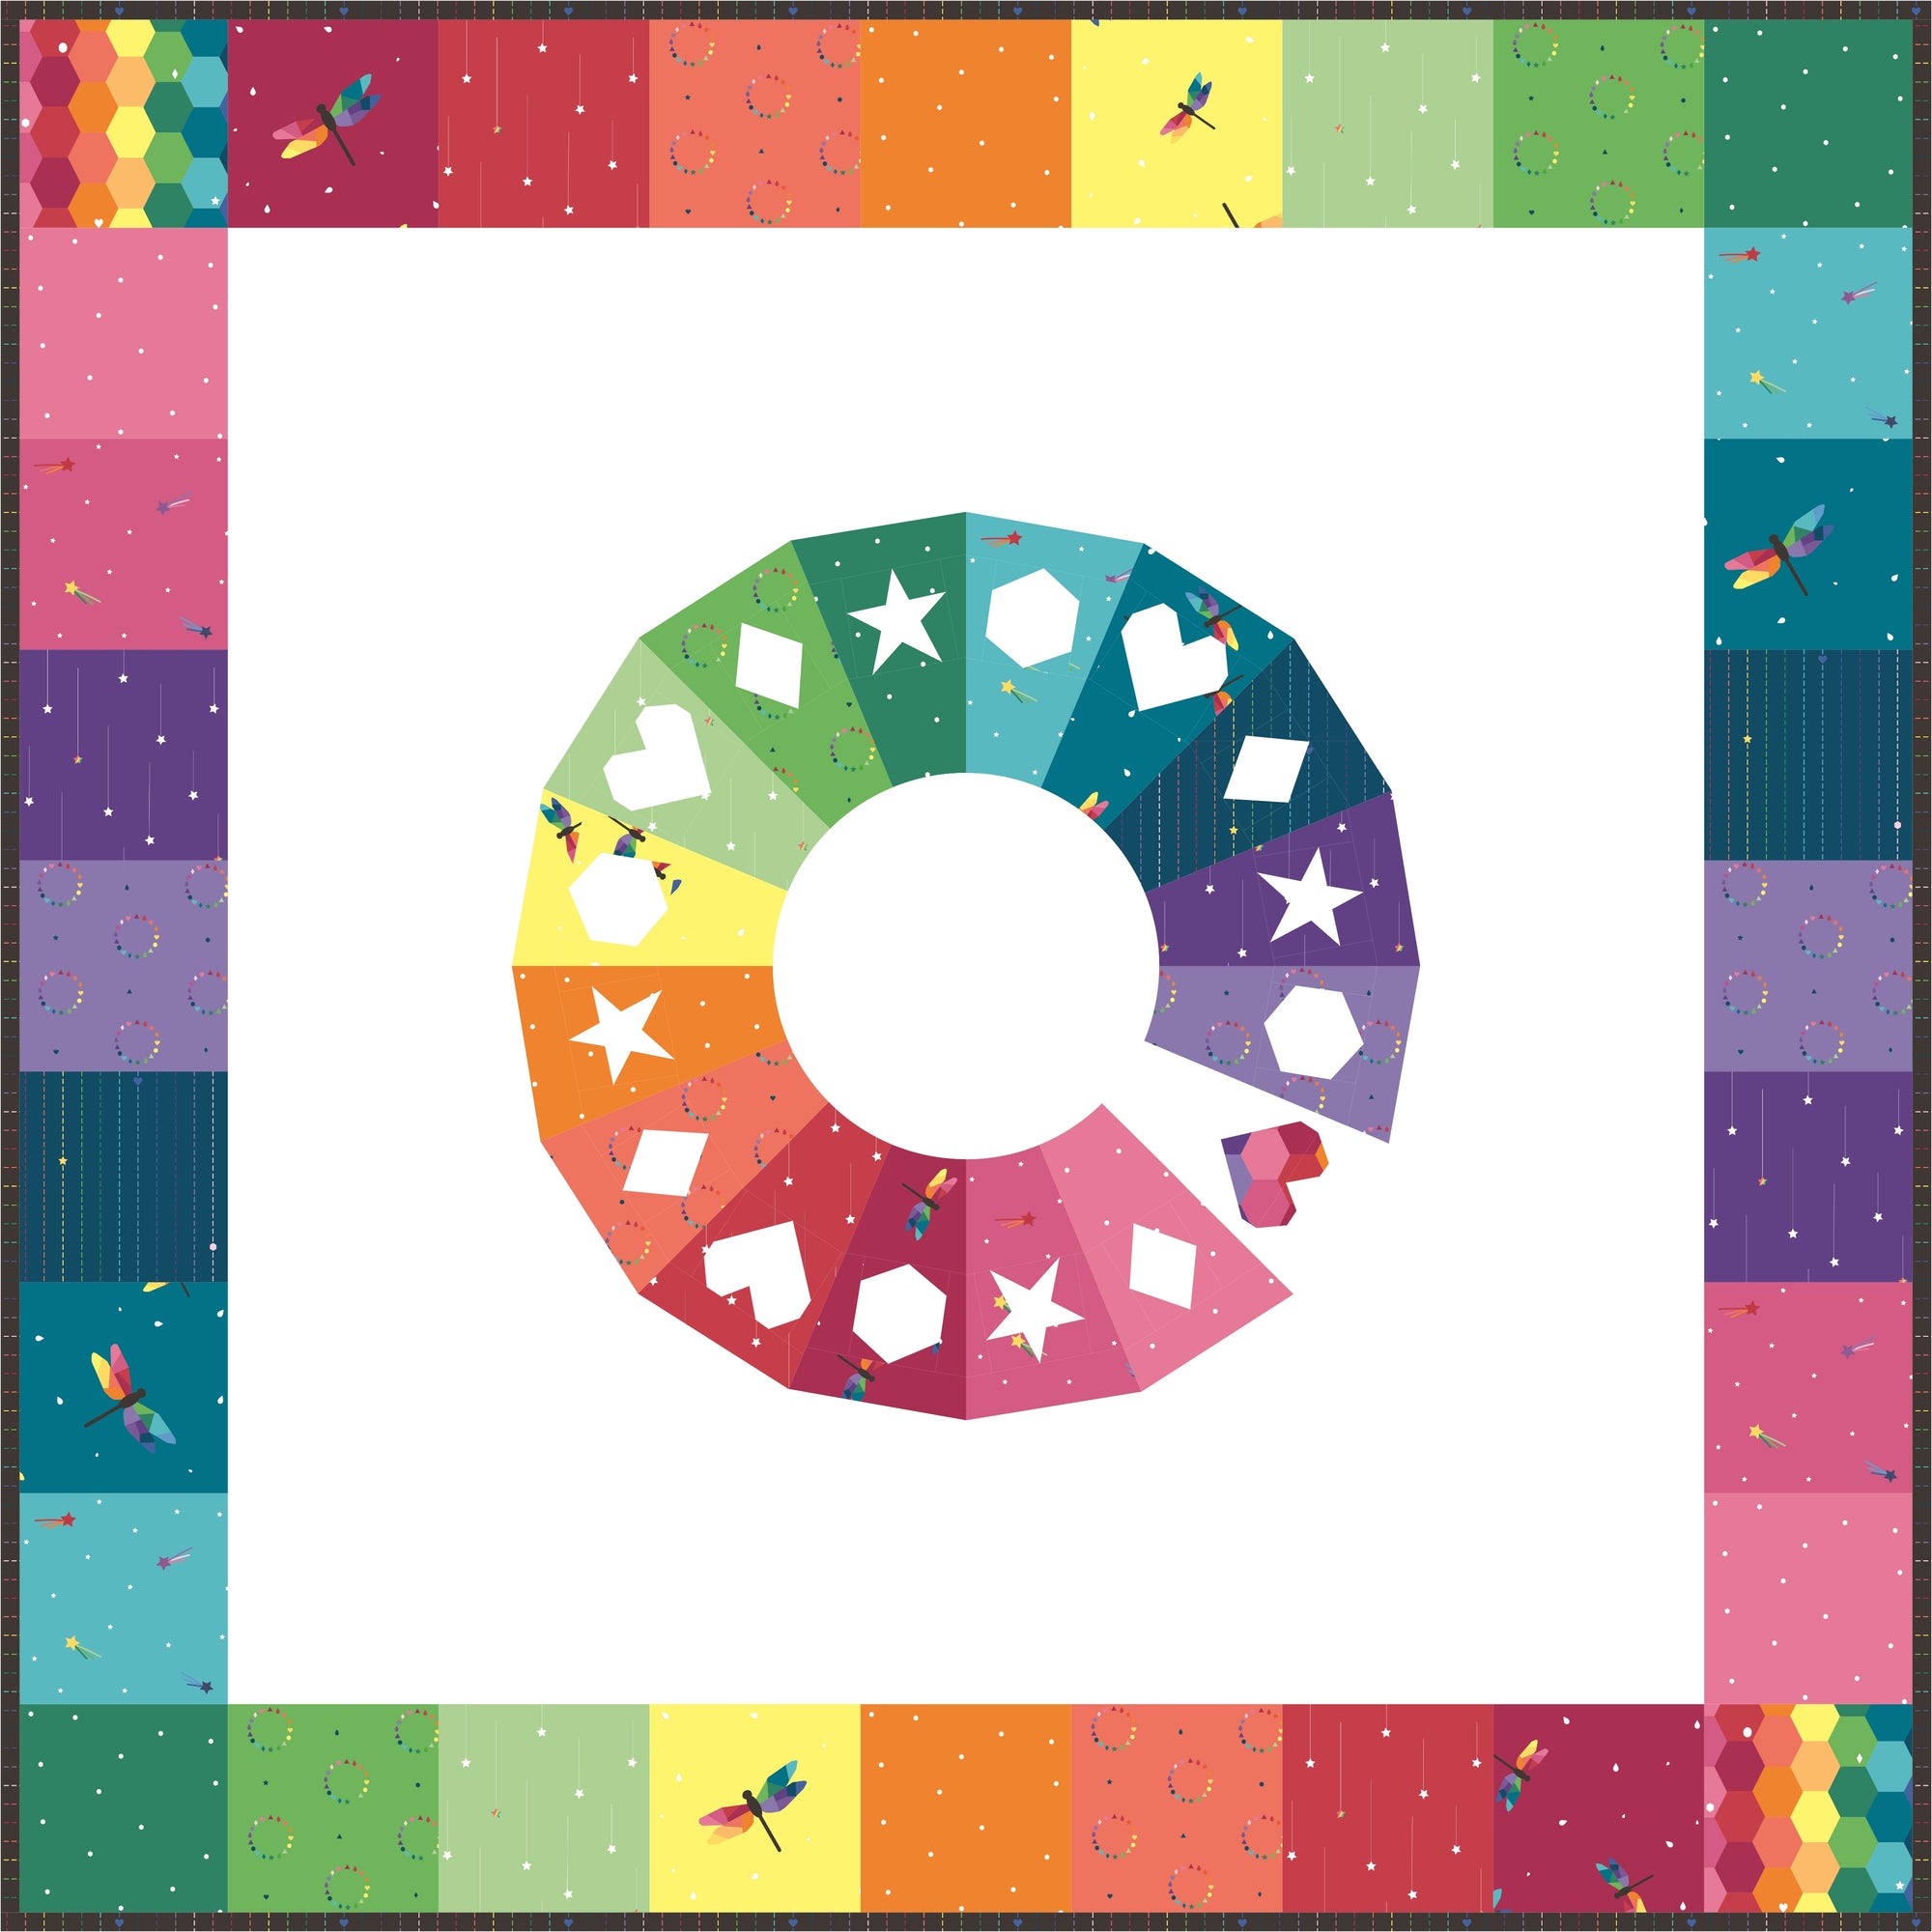 Daydream quilt pattern featuring a colour wheel and geometric shapes